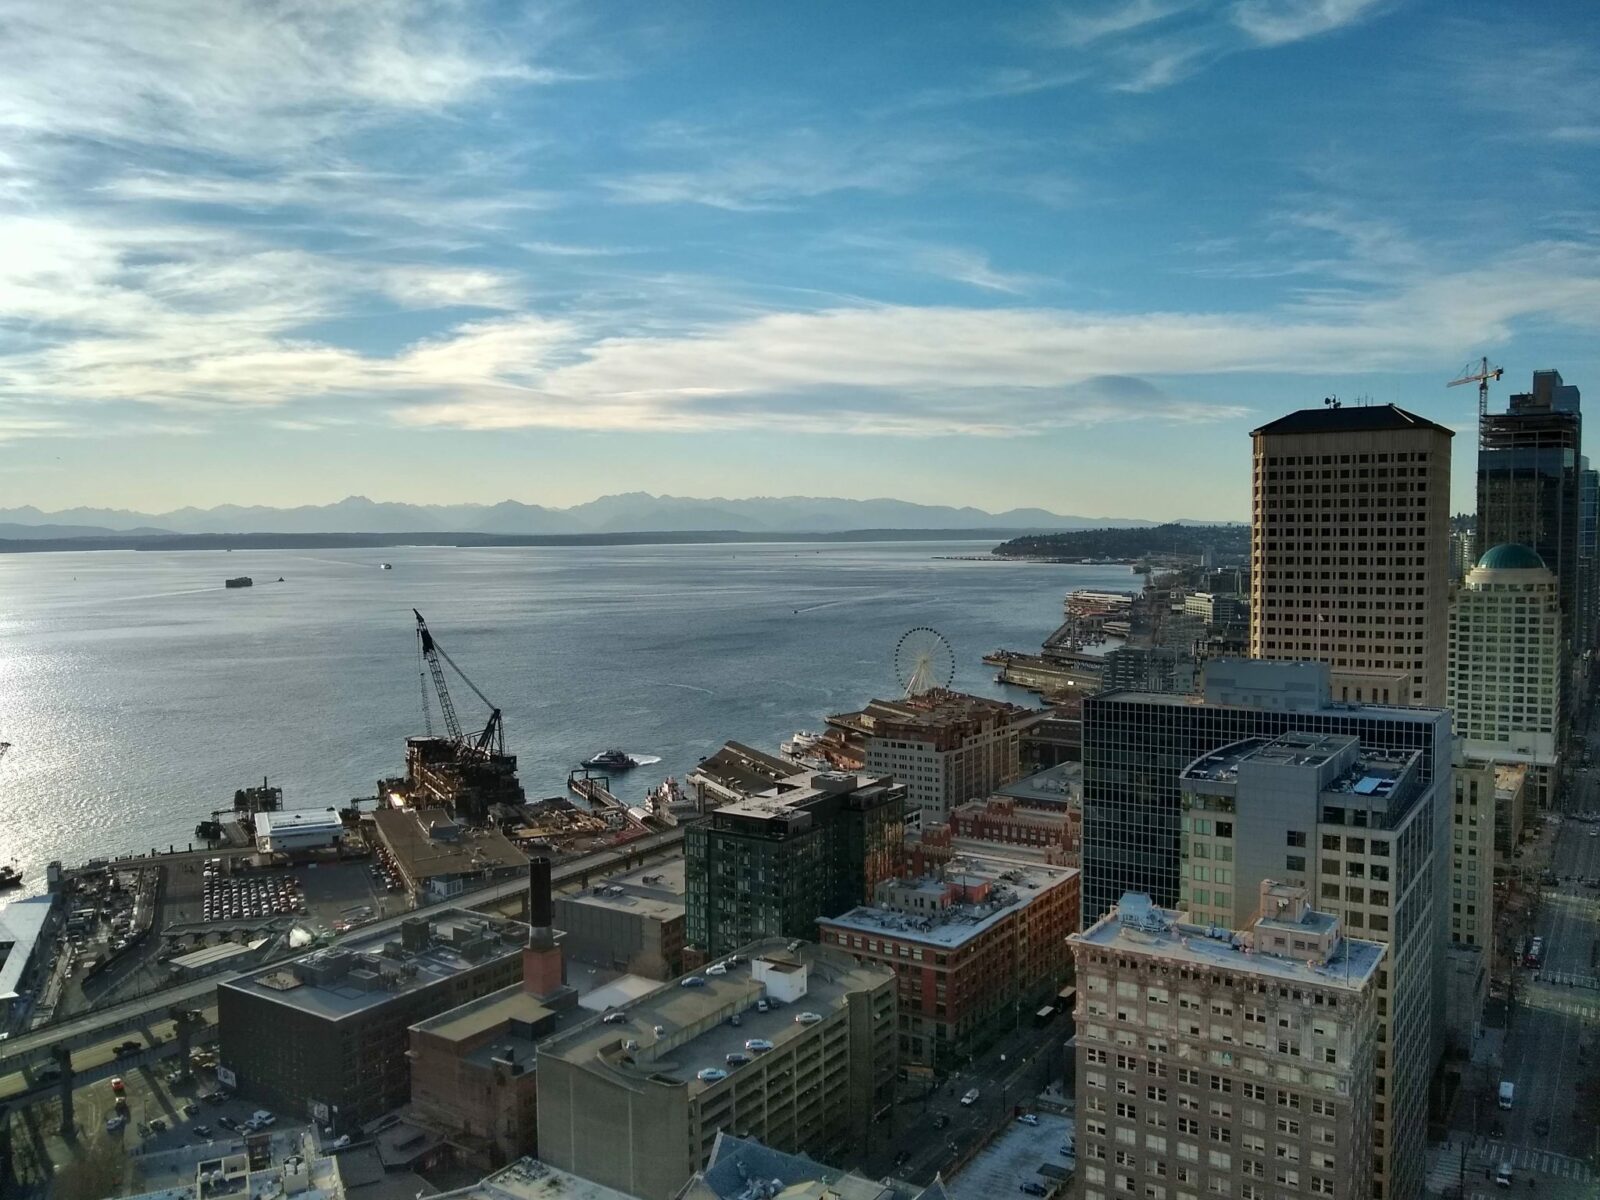 A big view is part of a Seattle Itinerary. This view is from the Smith Tower and is over some high Seattle buildings and the waterfront. There is construction on the waterfront and ferries and other ships in the water. In the distance are the Olympic Mountains. The sun is just about to set.